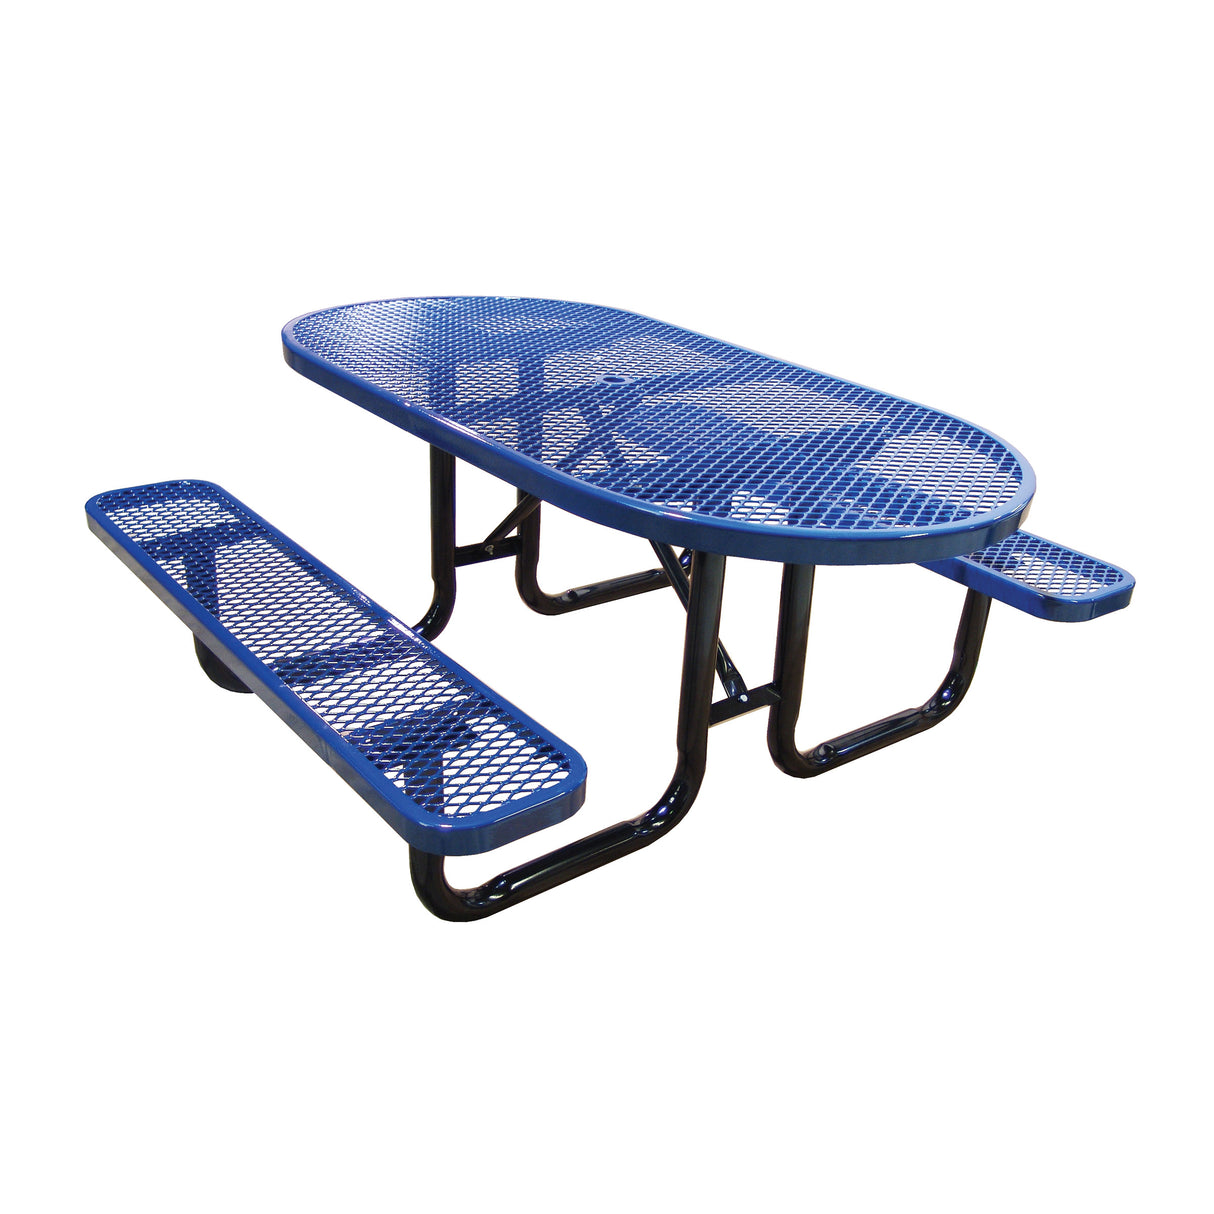 Oval Expanded Metal Picnic Table